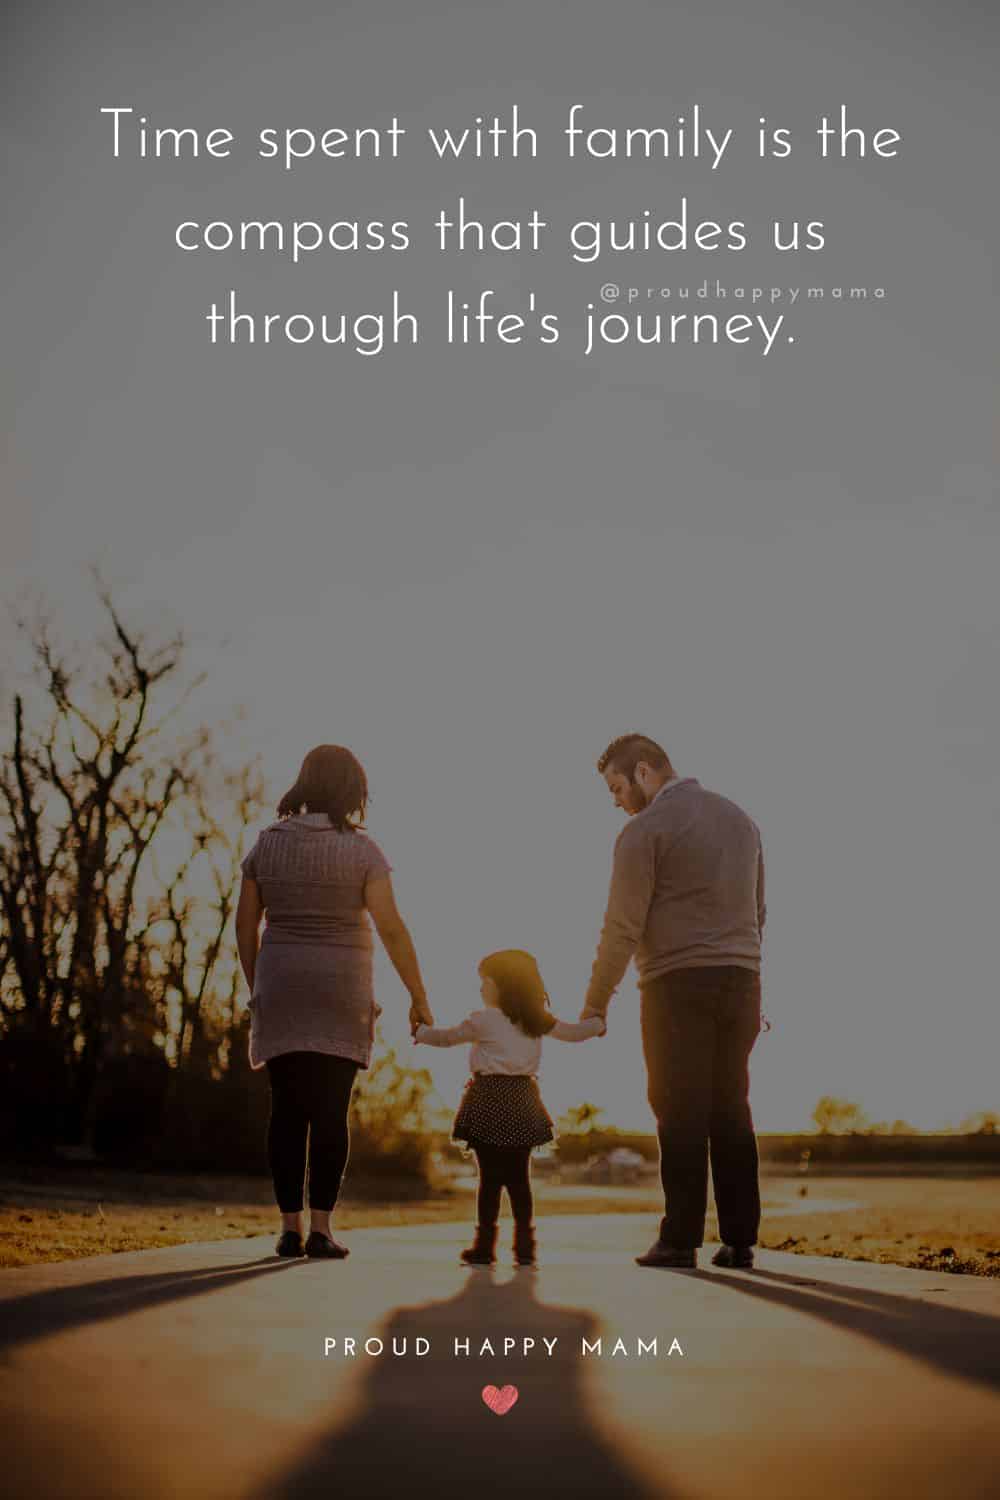 time with family quotes - Time spent with family is the compass that guides us through life's journey.